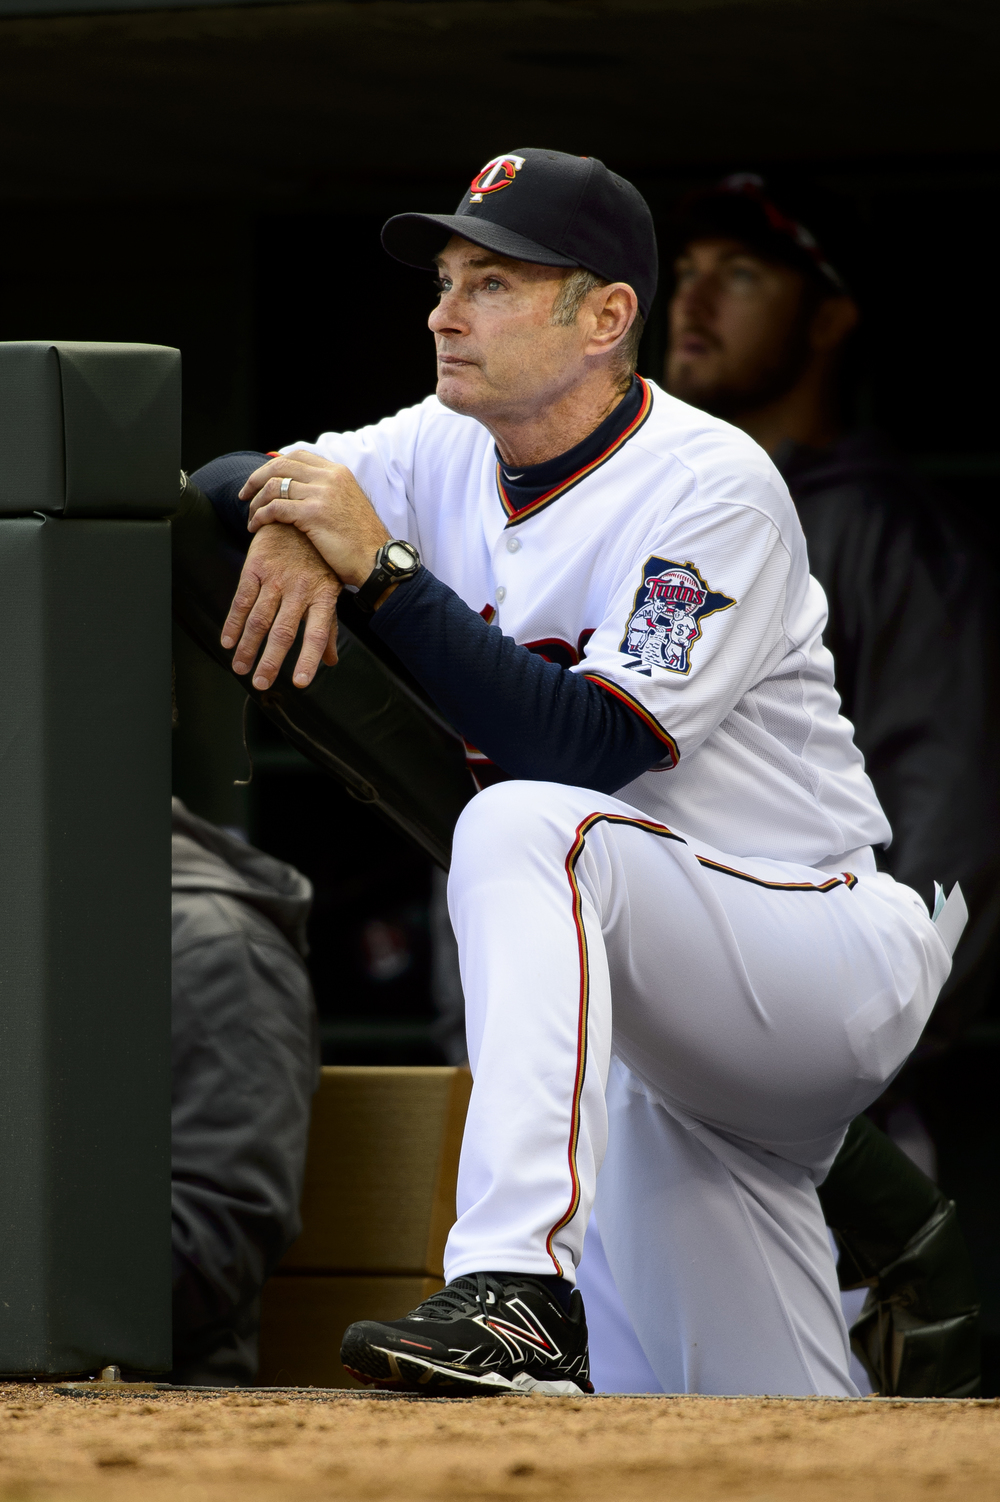  Manager Paul Molitor #4 of the Minnesota Twins looks on during the home opening game against the Kansas City Royals on April 13, 2015 at Target Field in Minneapolis, Minnesota.   (Photo by Hannah Foslien/Getty Images)  